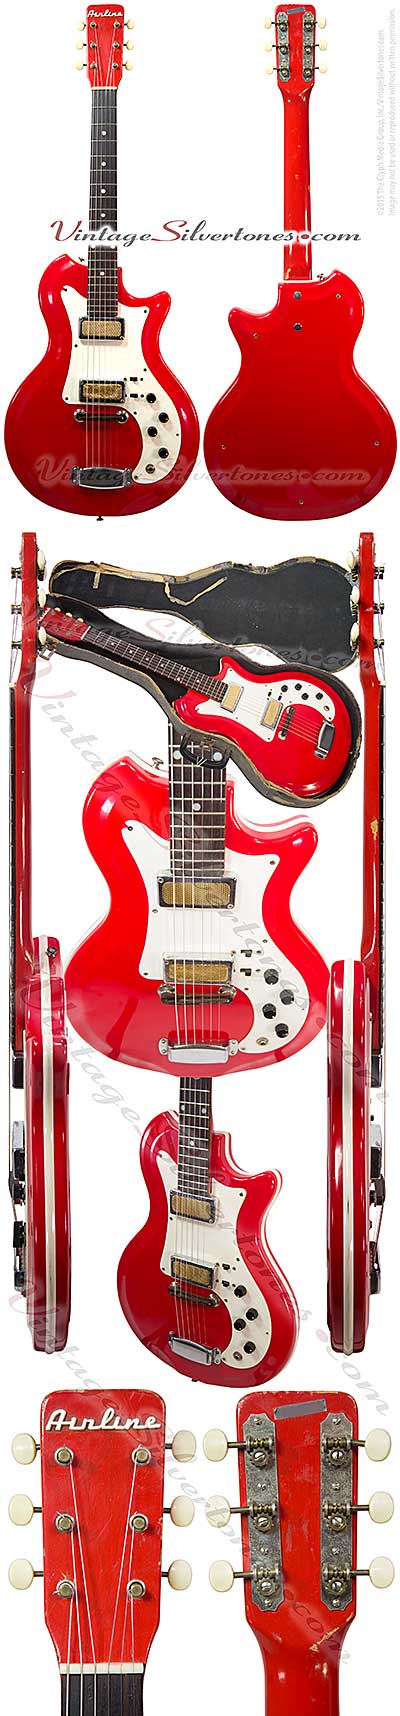 Airline 7270 semi-hollow body electric guitar 2 gold foil pickups, red finish, made by National, Supro, Valco in Chicago 1965, res-o-glass